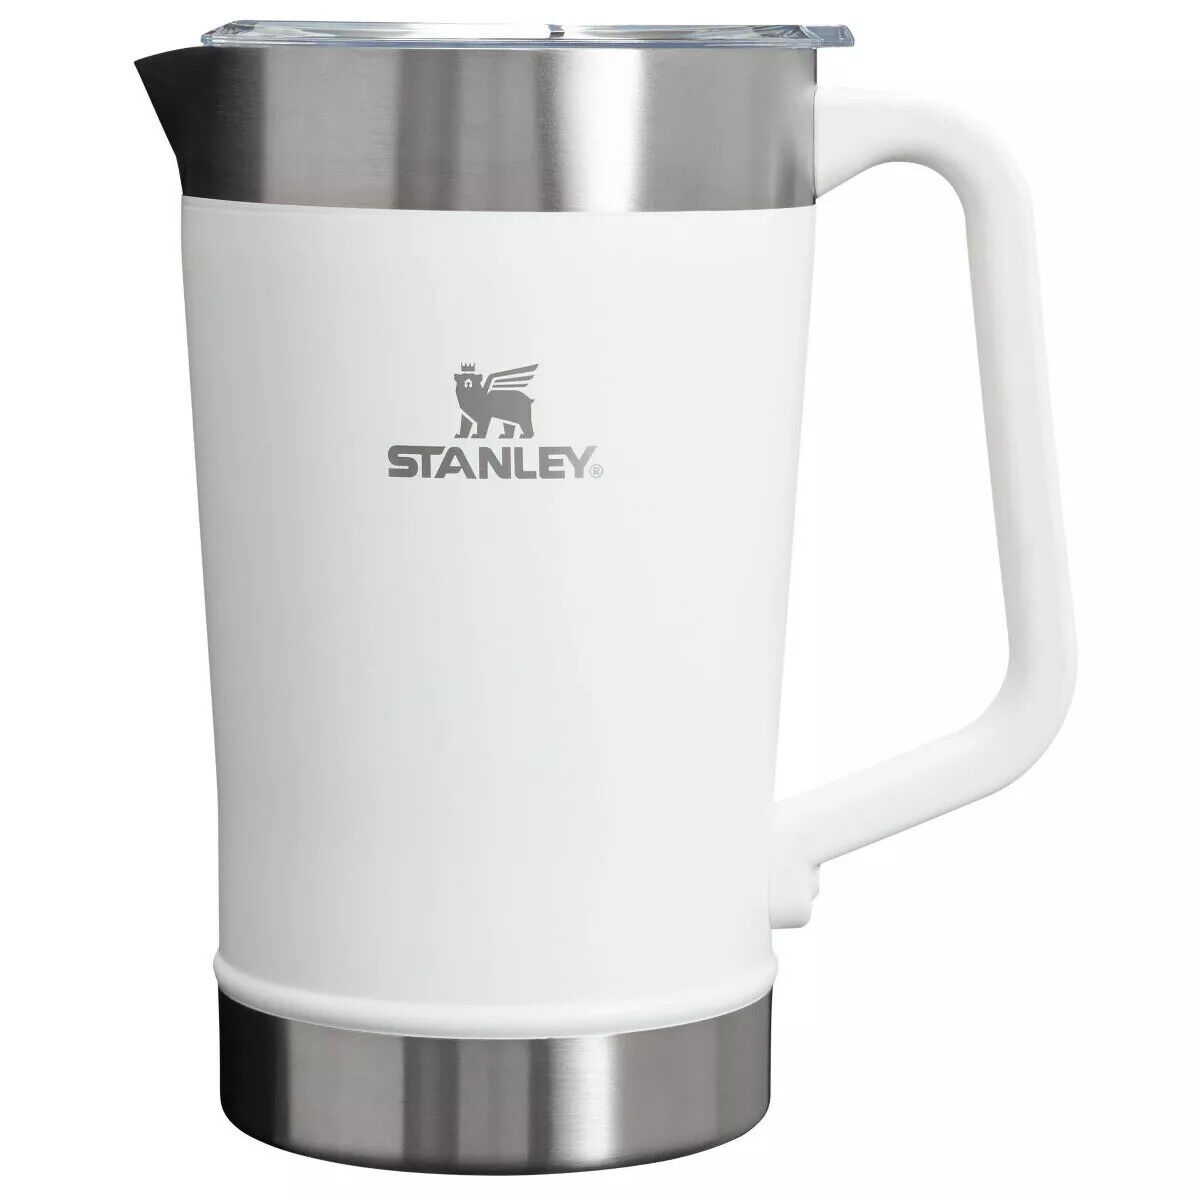 Stanley 64 oz Stainless Steel Stay-Chill Pitcher Does not apply